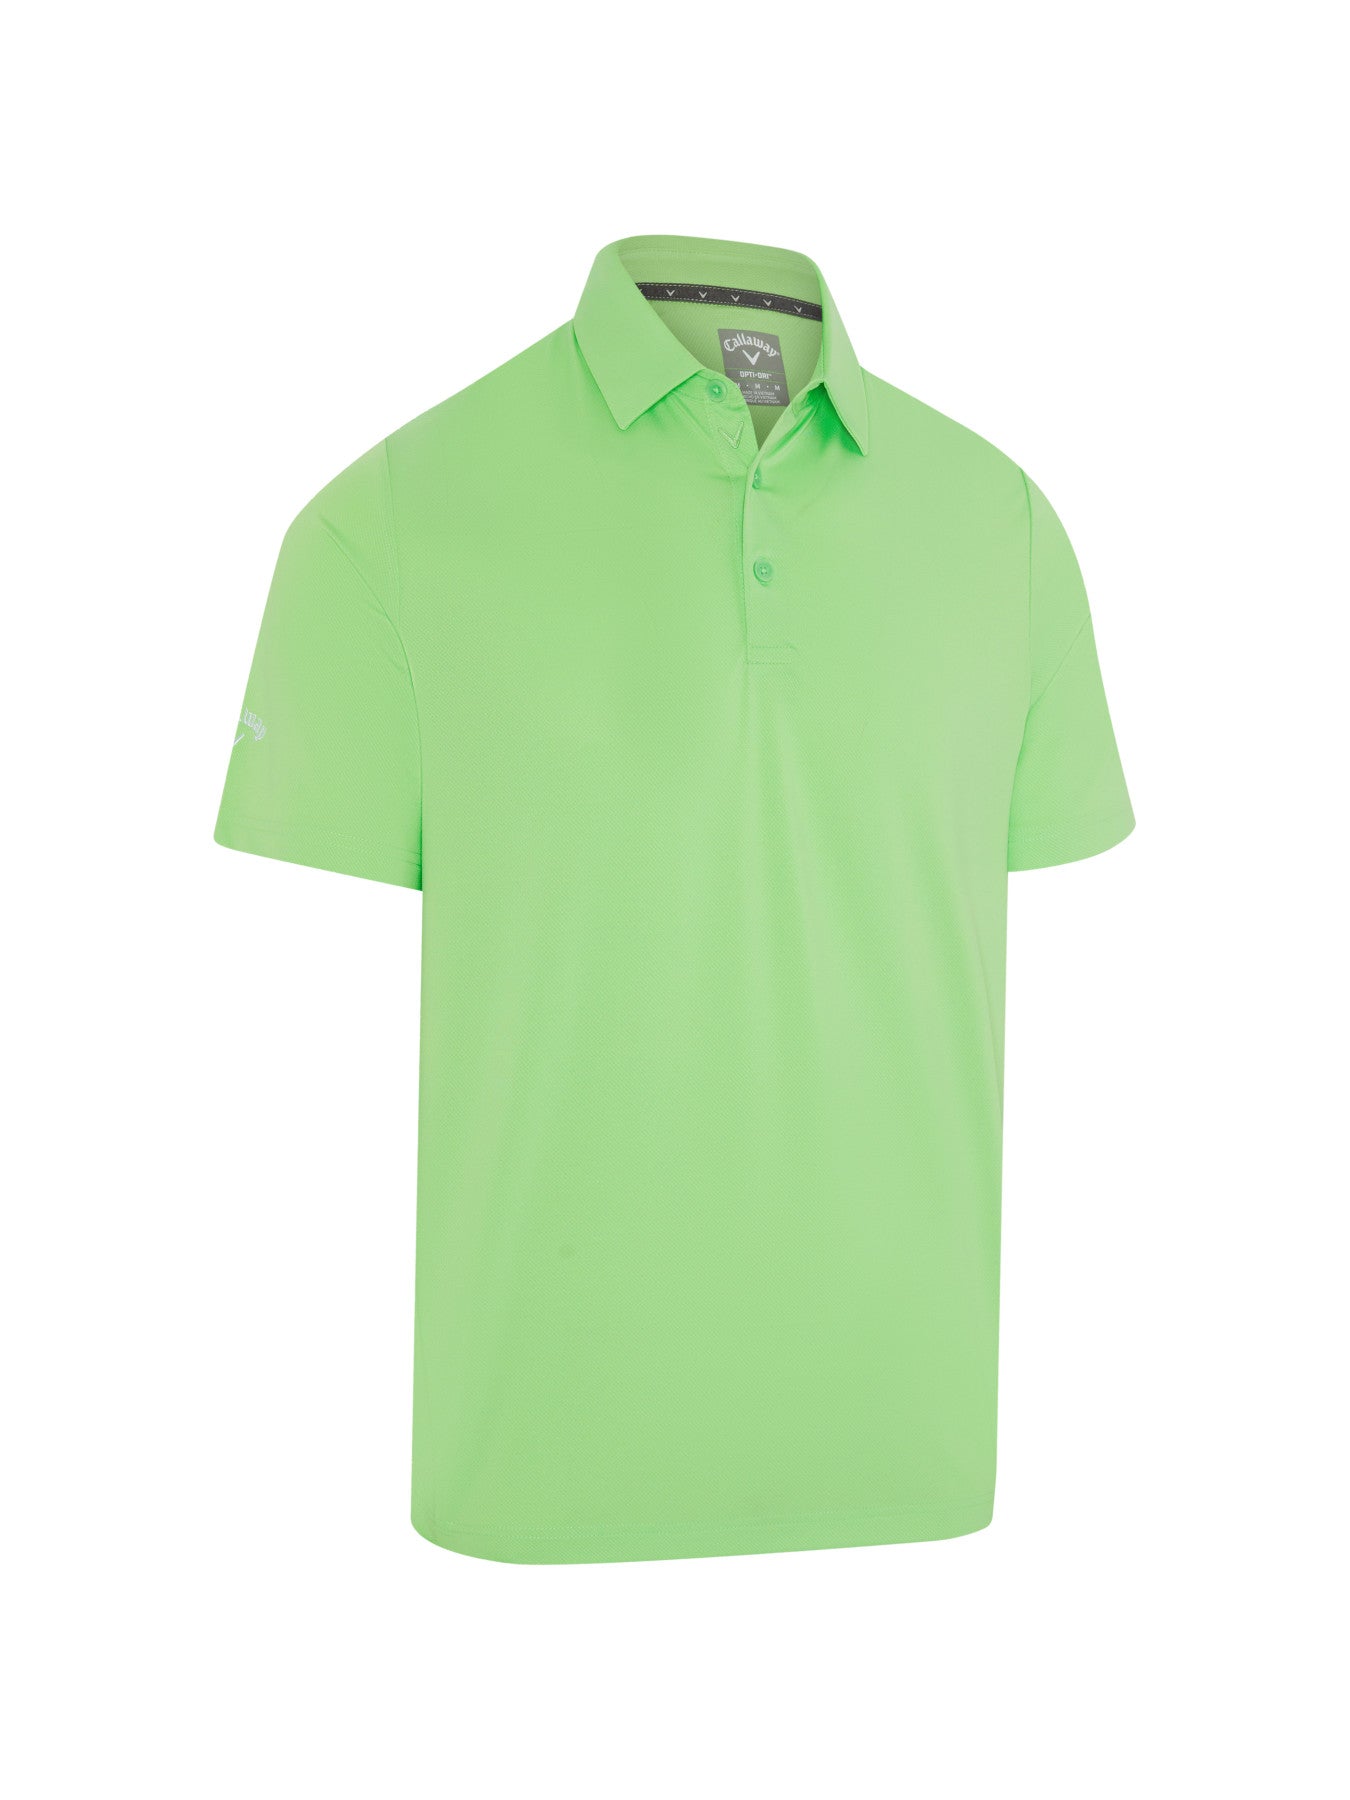 View Solid Swing Tech Short Sleeve Golf Polo Shirt In Green Ash information